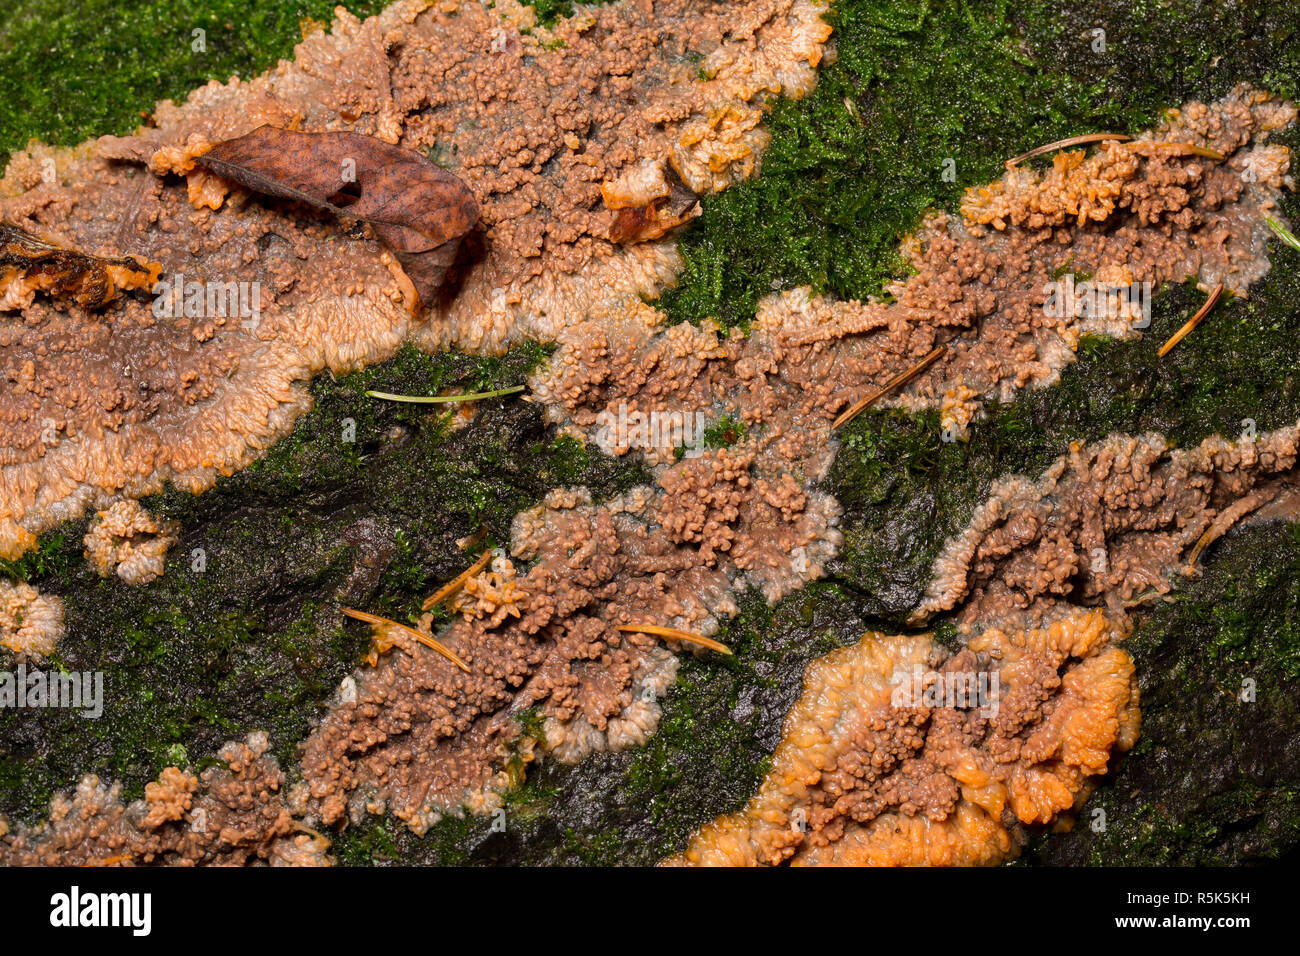 Wrinkled crust fungus, Phlebia radiata, growing on a fallen branch in woodlands in North Dorset England UK GB Stock Photo